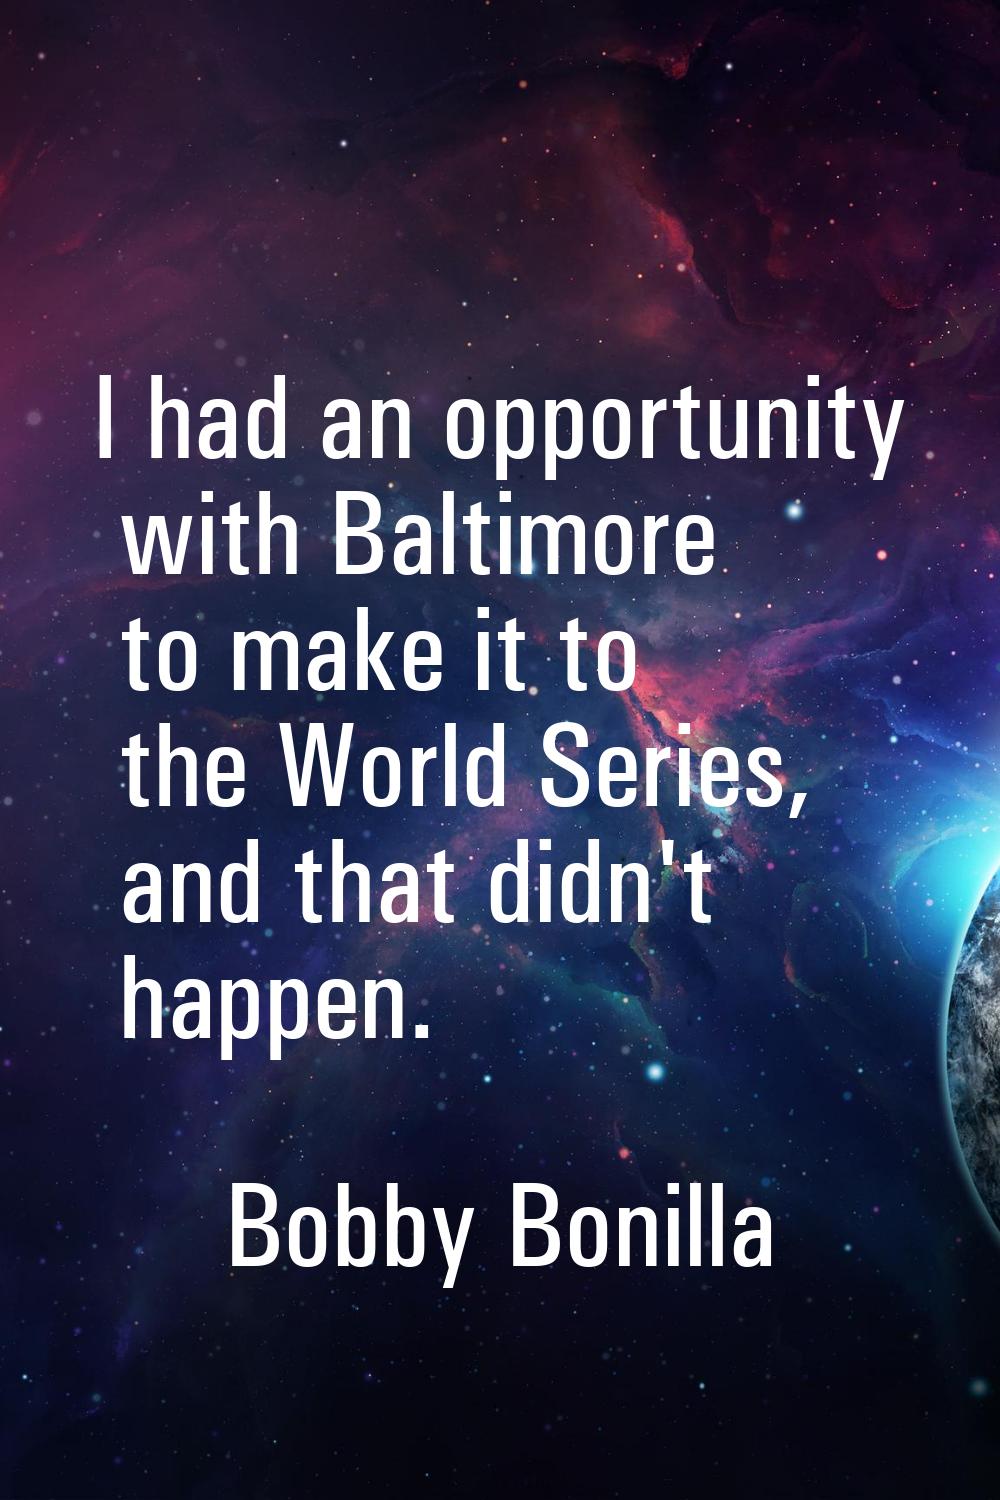 I had an opportunity with Baltimore to make it to the World Series, and that didn't happen.